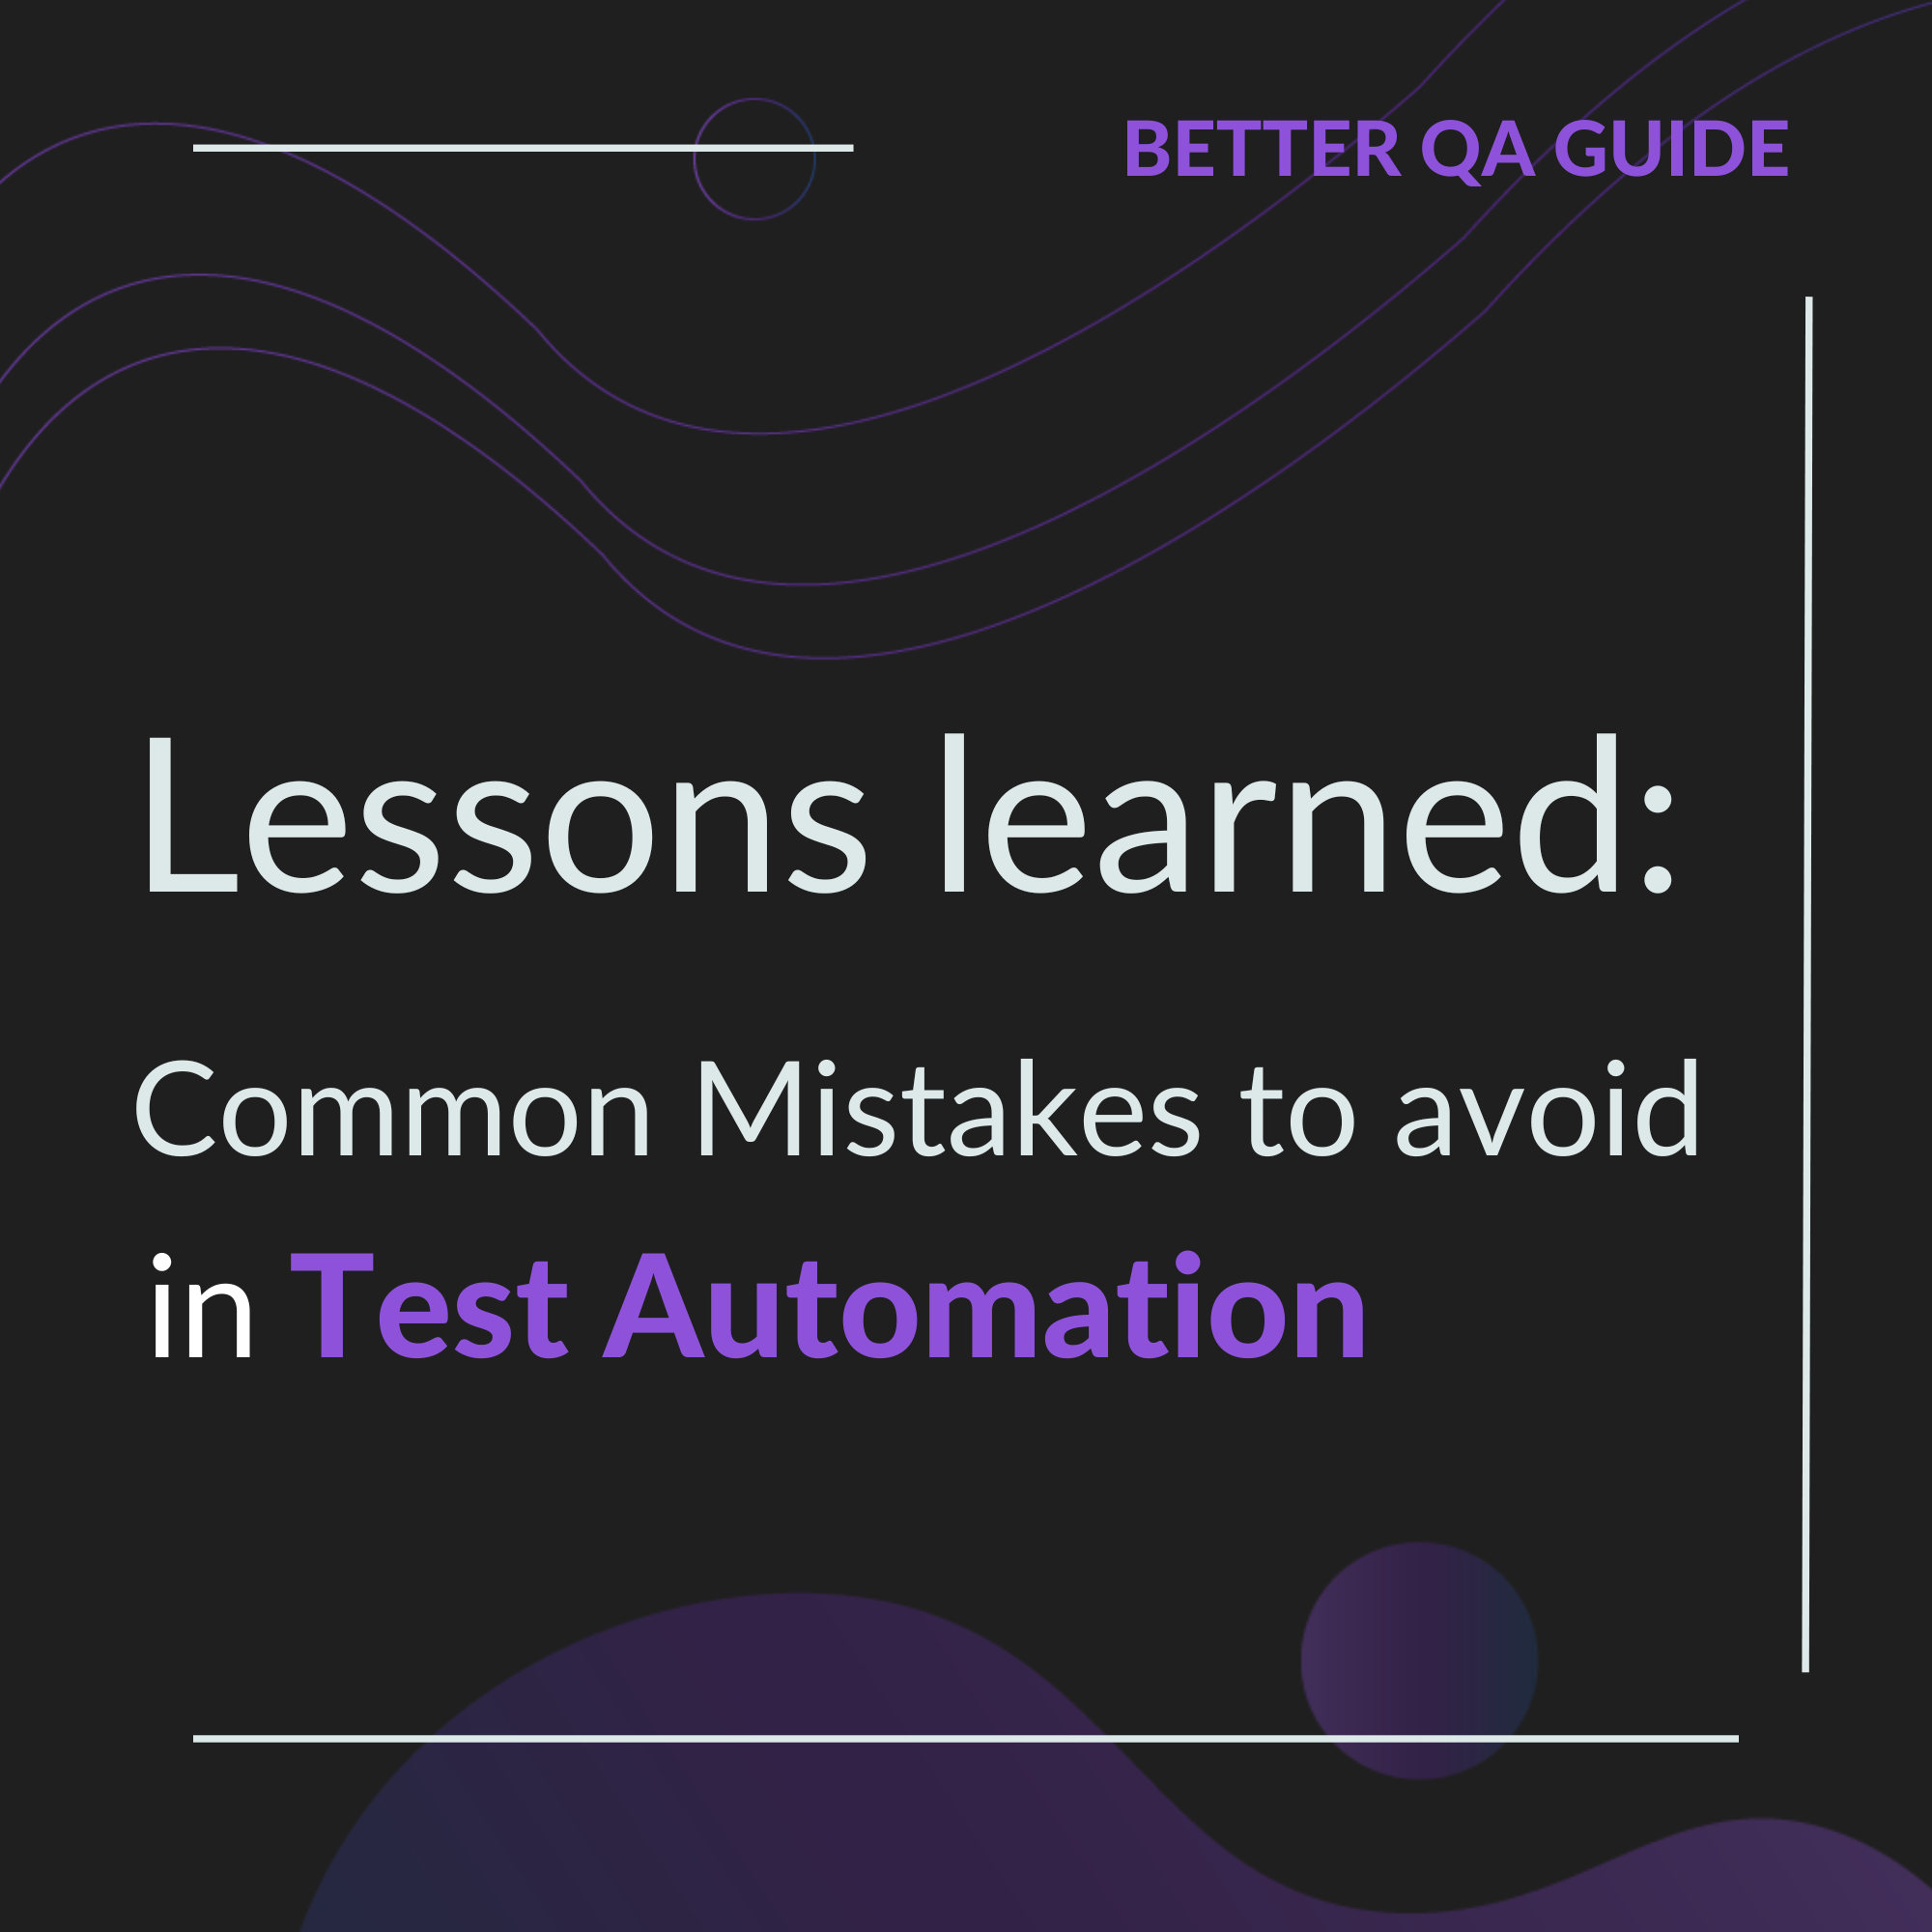 Lessons learned common mistakes to avoid in test automation 1